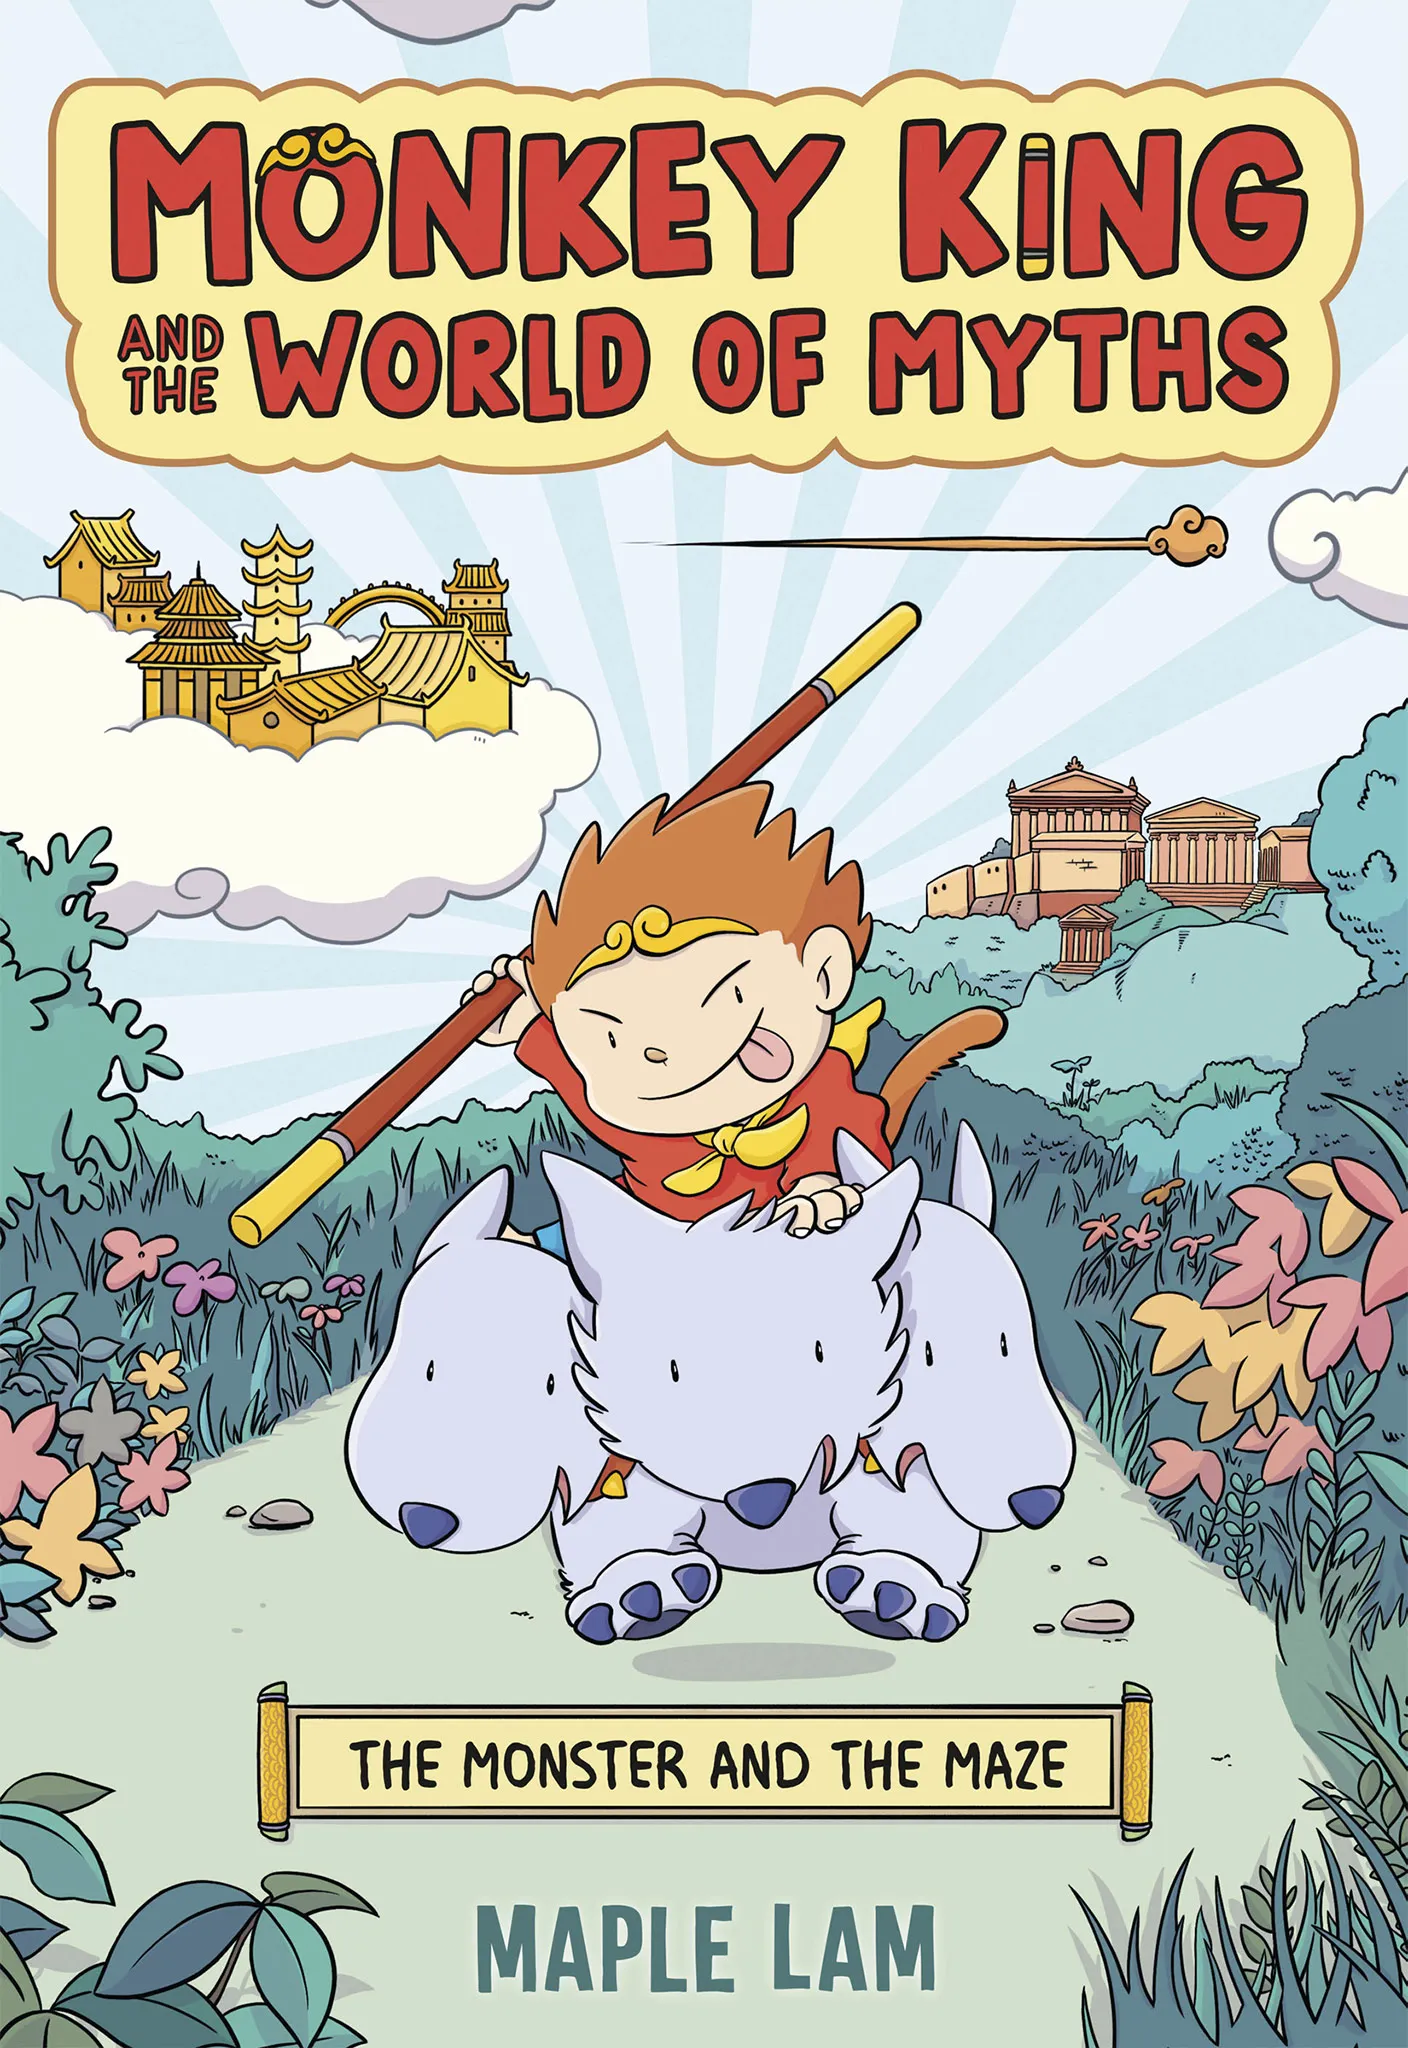 The Monster and the Maze (Monkey King and the World of Myths #1)